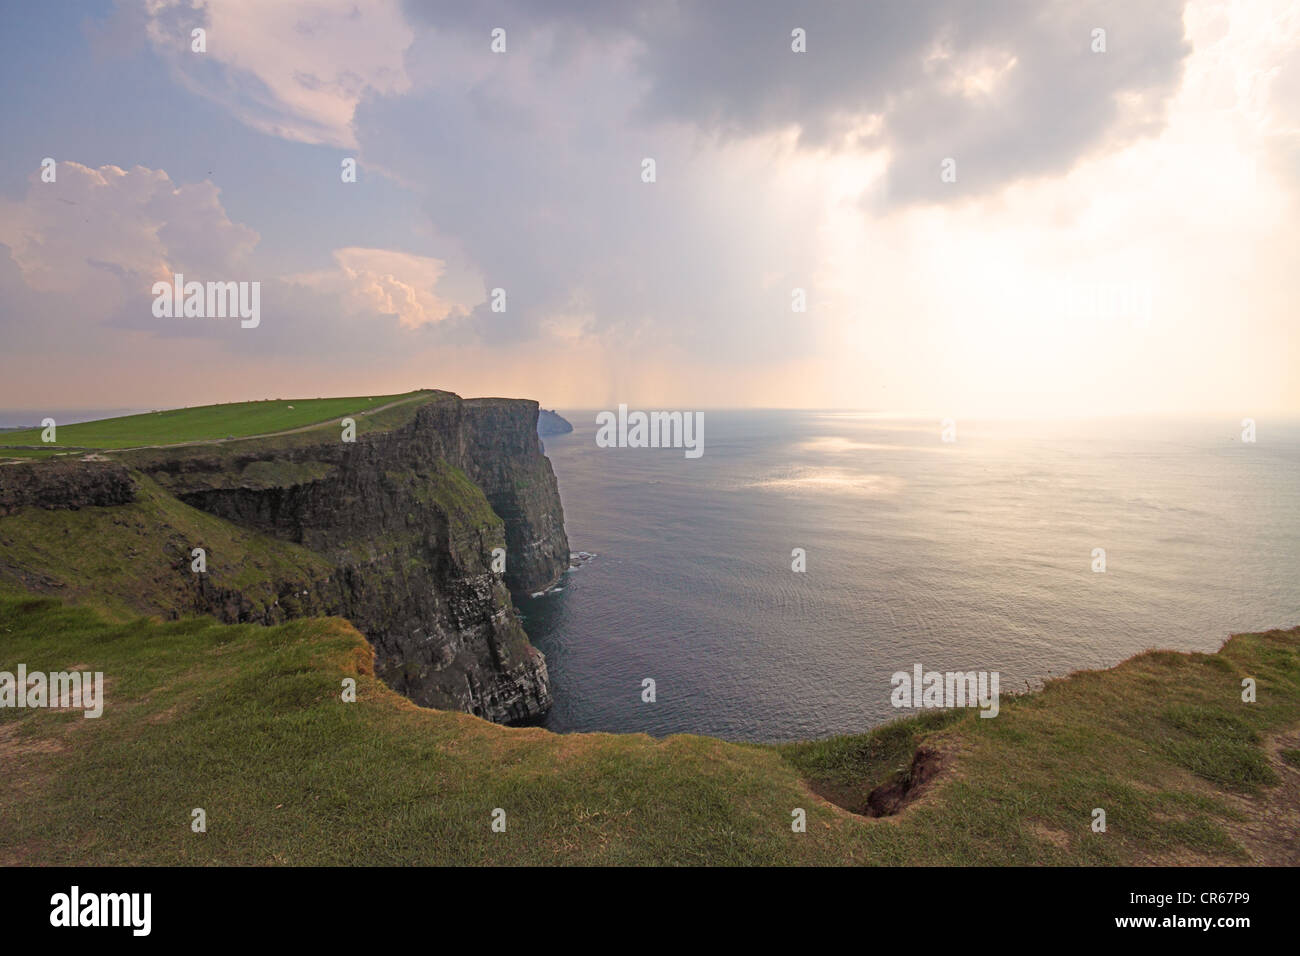 The Cliffs of Moher (Ireland) in a misty day at dusk Stock Photo